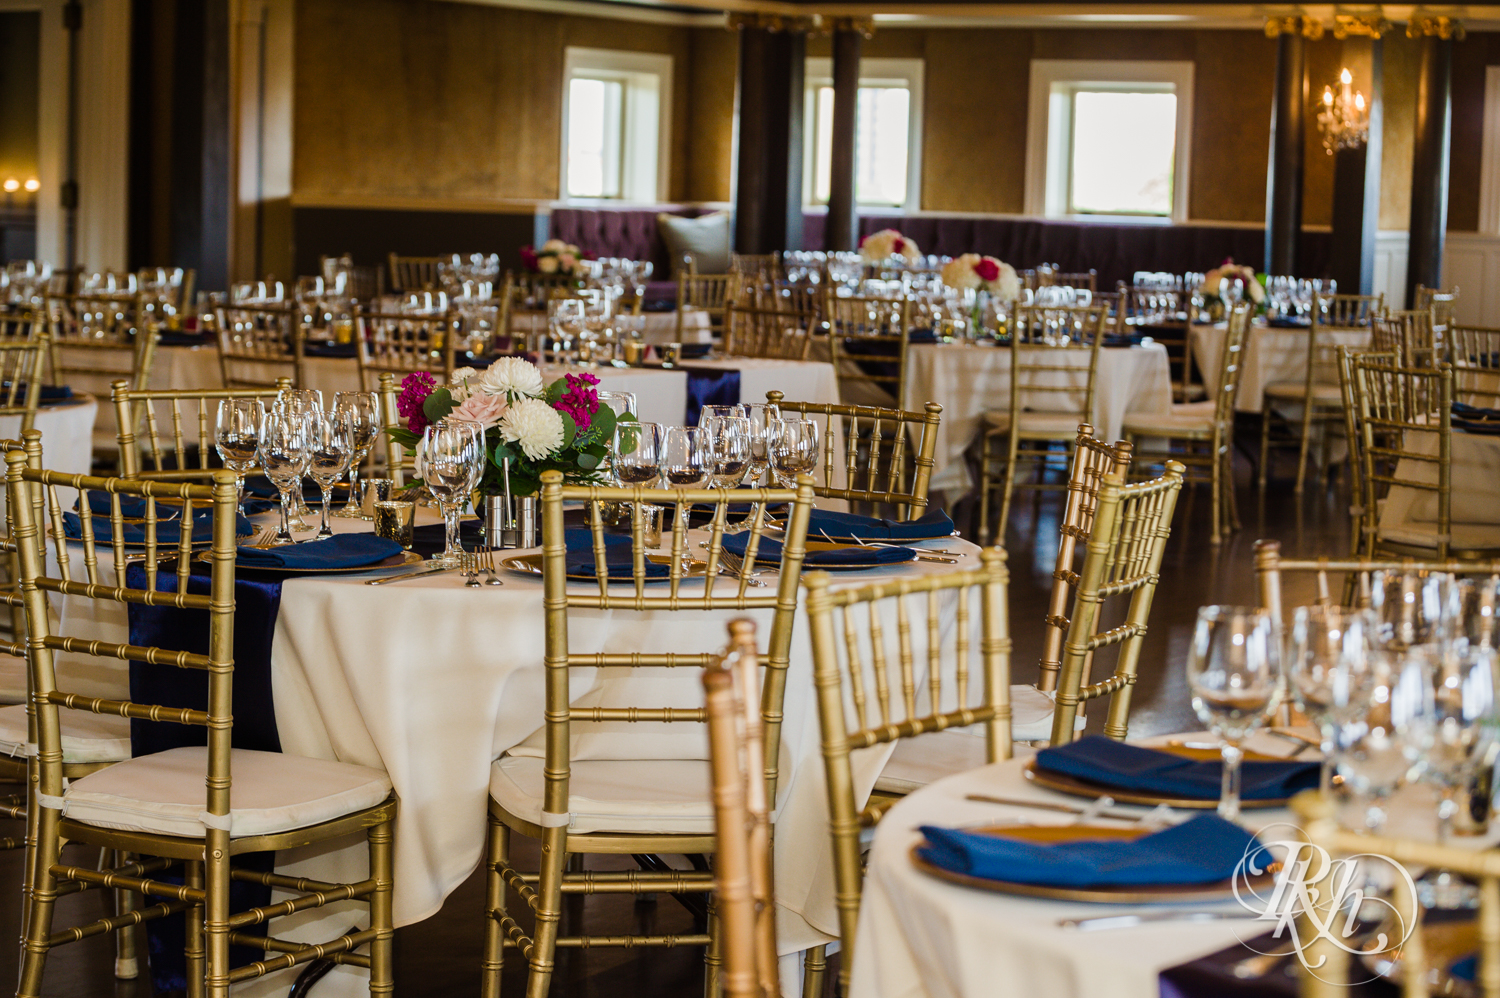 Indoor wedding reception setup at the Semple Mansion in Minneapolis, Minnesota.